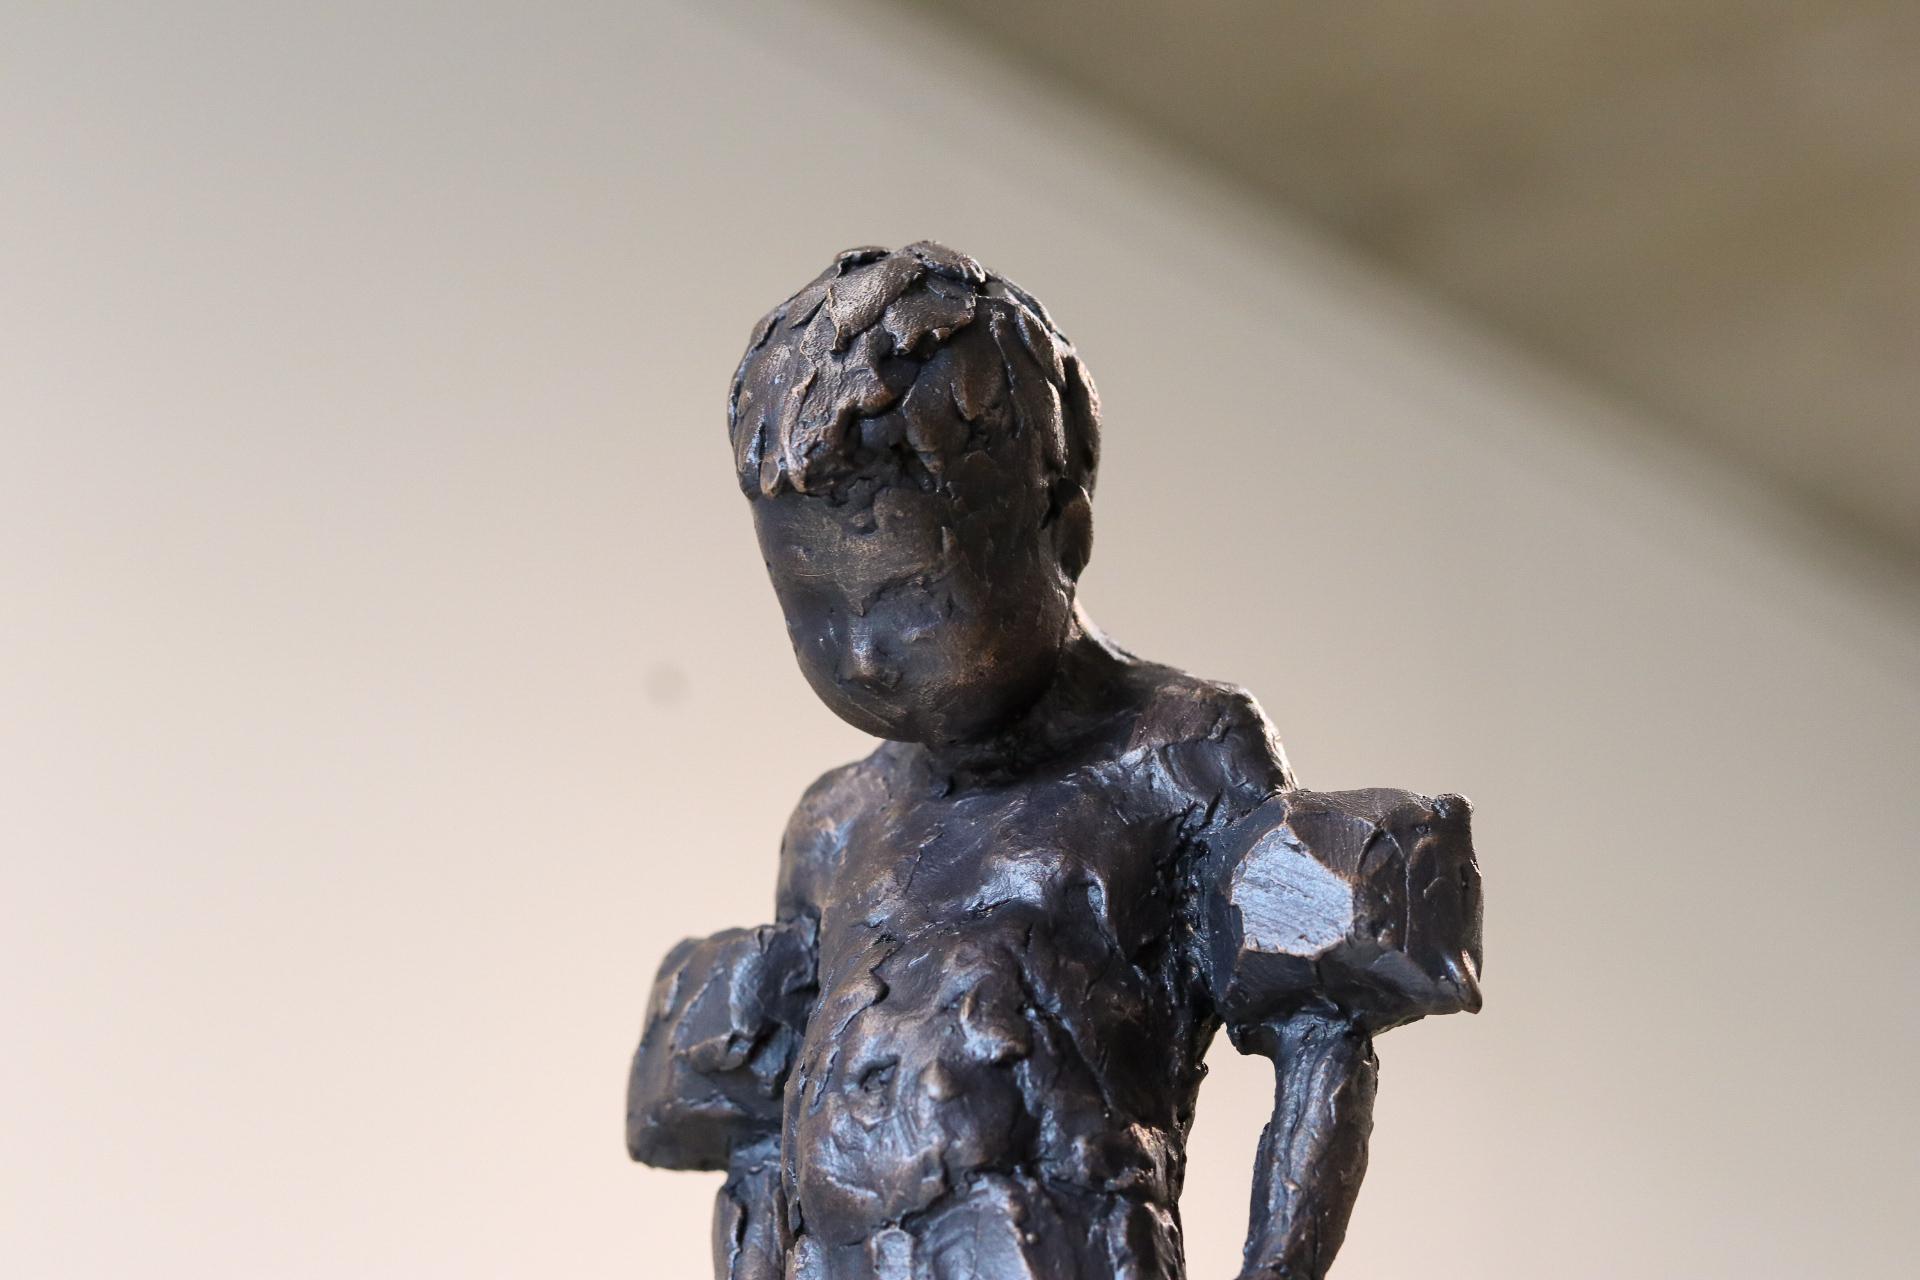 Swimming Lessons - 21st Century Contemporary Bronze Sculpture of a Little Boy 2